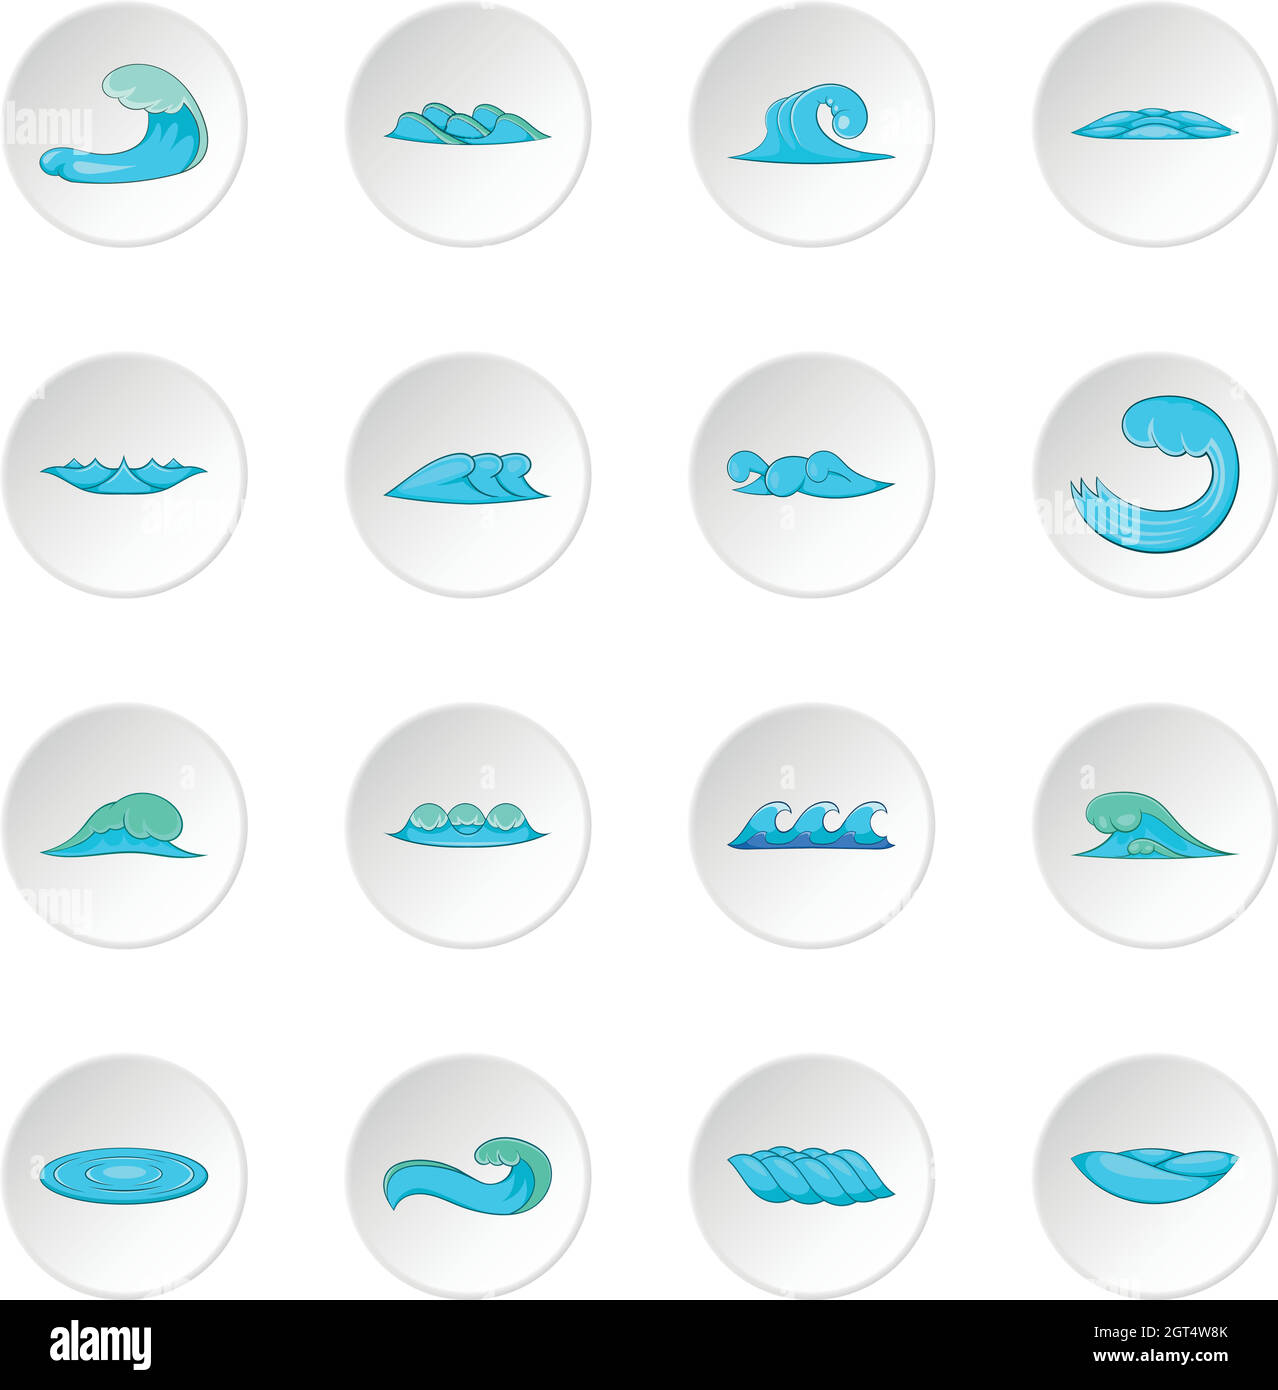 Waves icons set Stock Vector